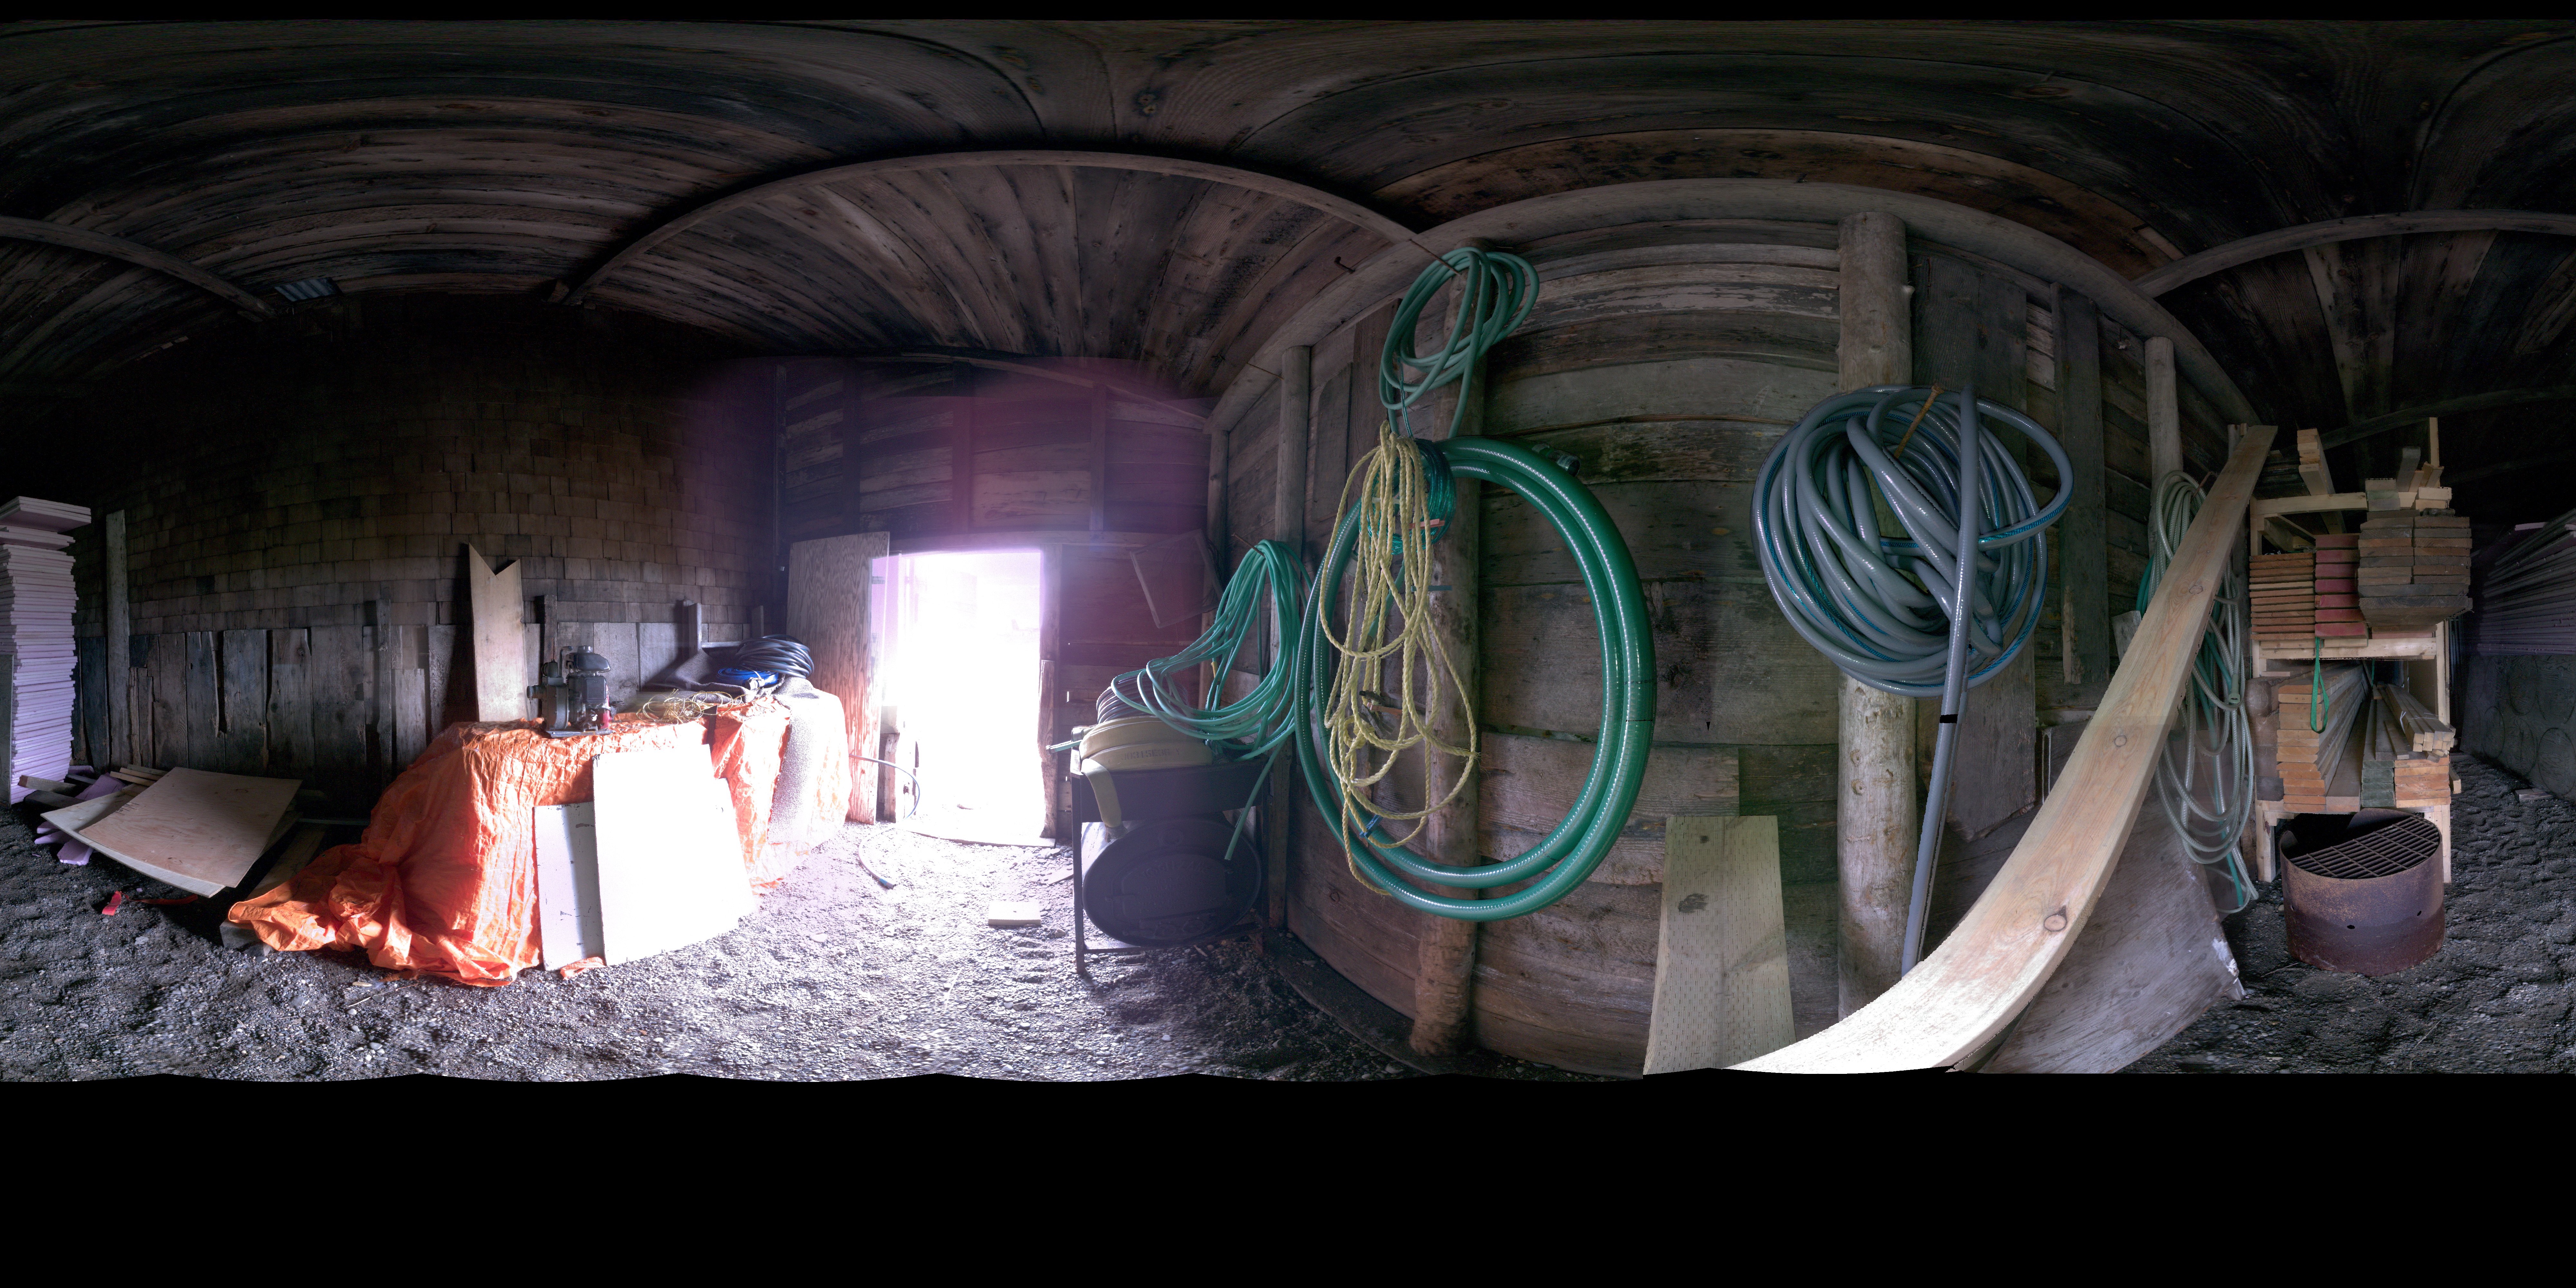 Panoramic view of the Pacific Steam Whaling Co. Bonehouse interior from the Leica BKL 360, scanning location 5